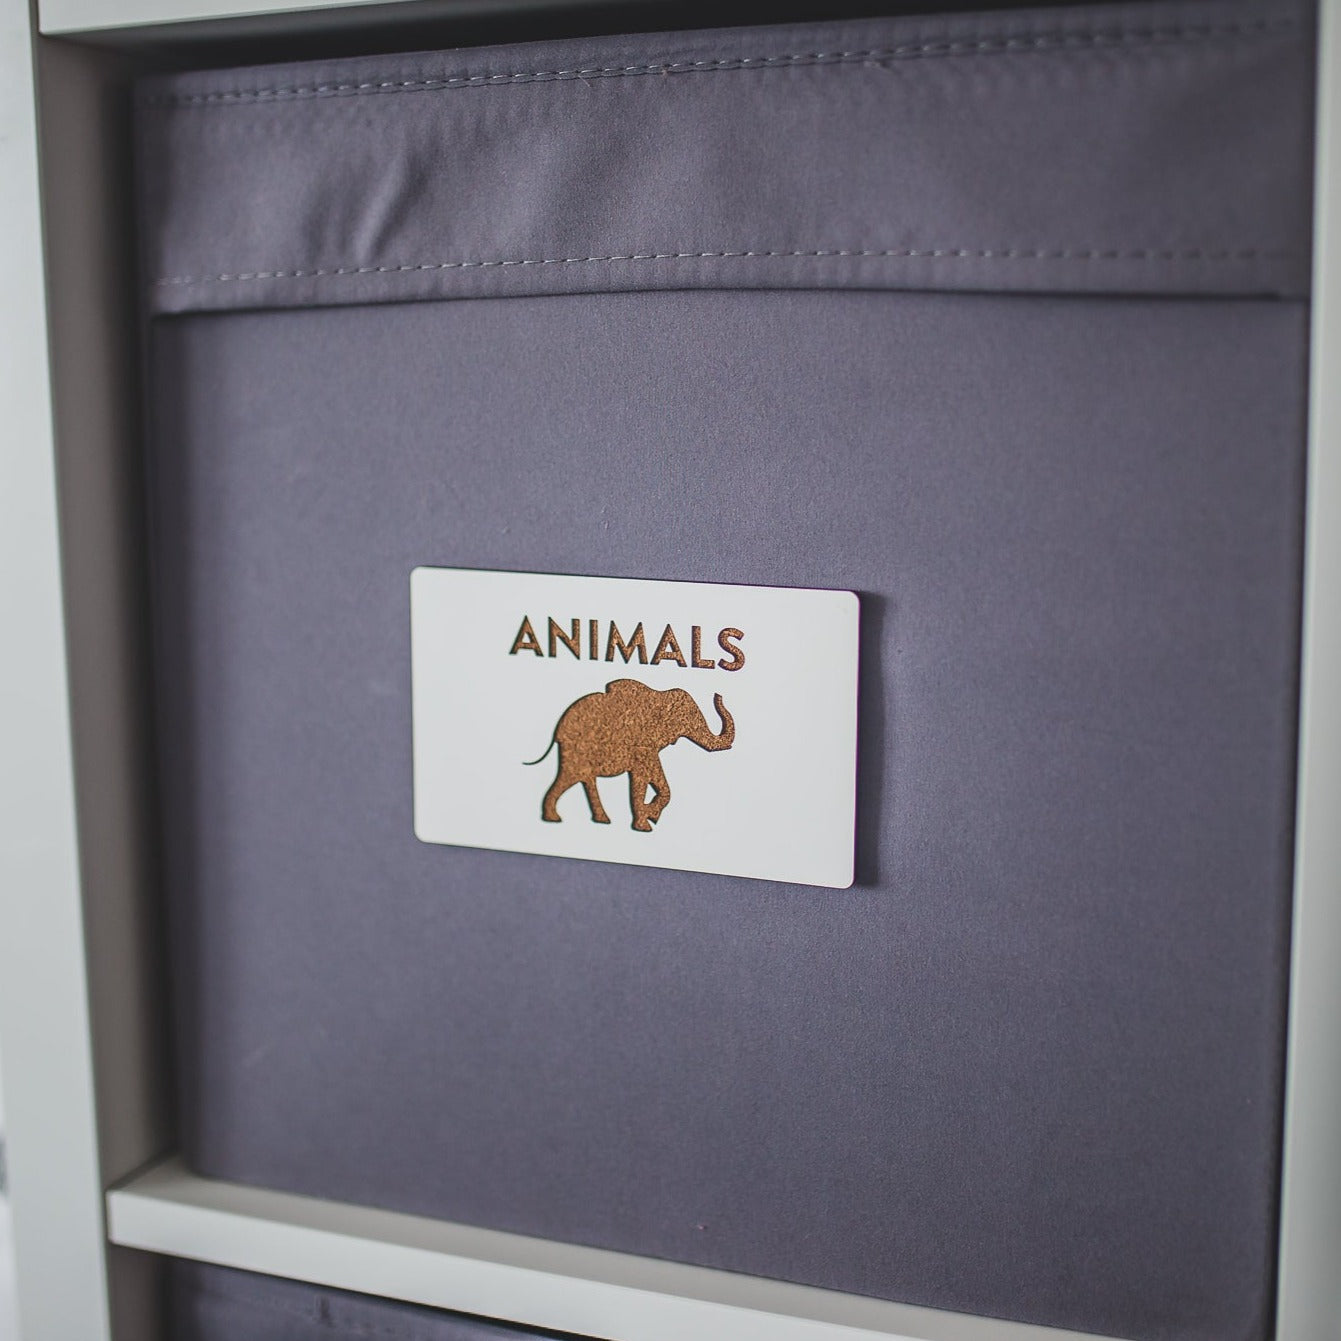 customizable toy bin labels - white MDF - animals - by LeeMo Designs in Bend Oregon